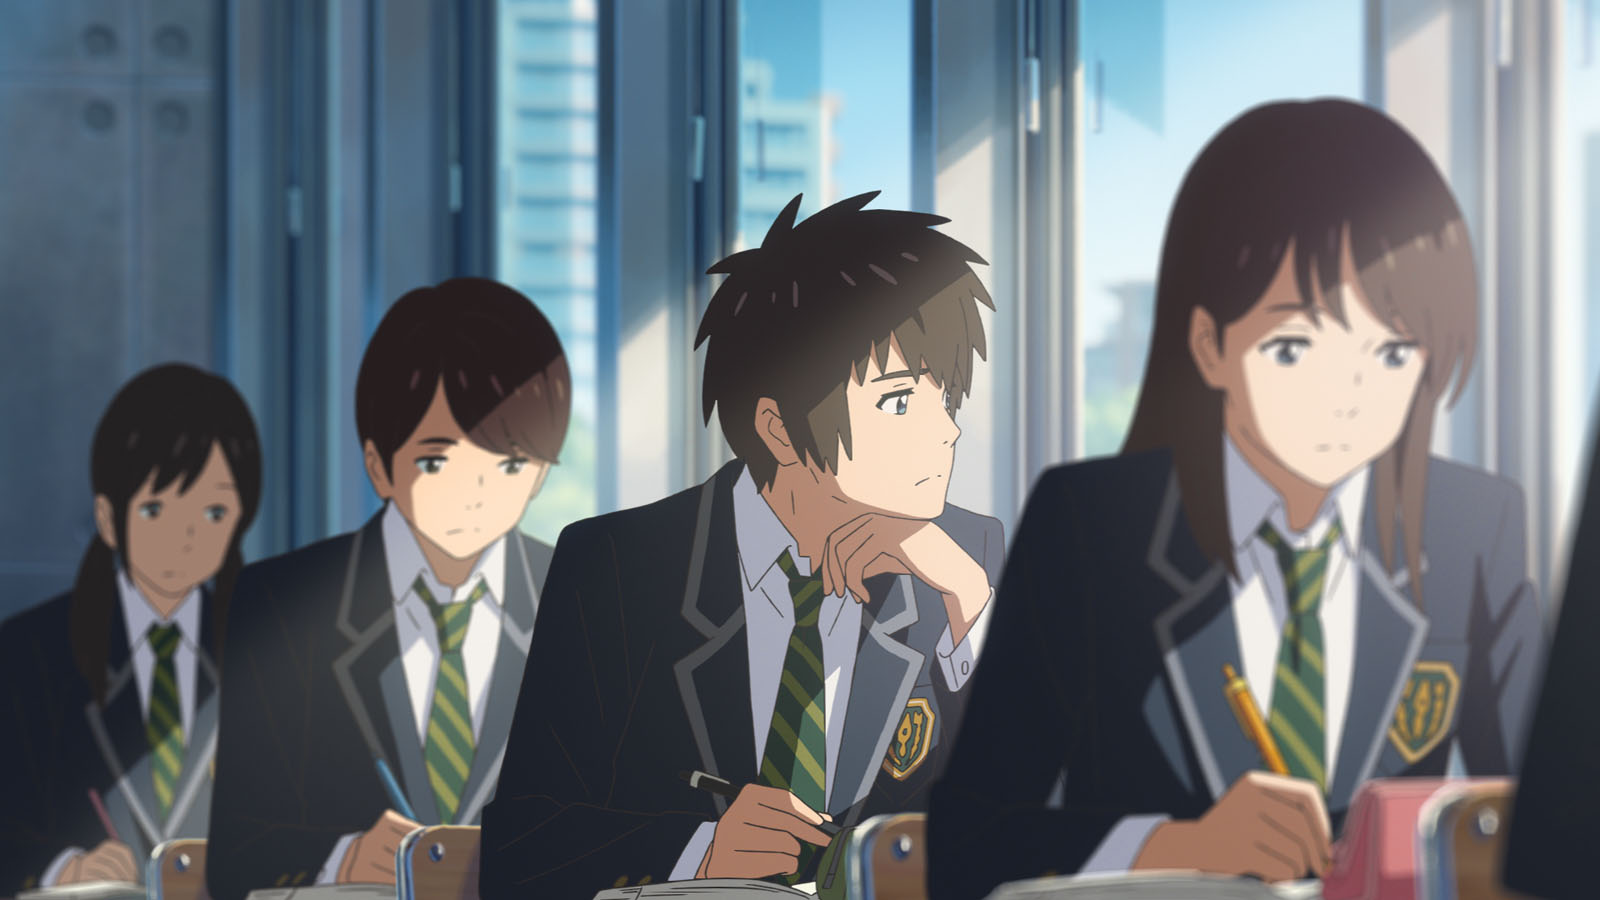 Cinematogrill your name film sortie anime